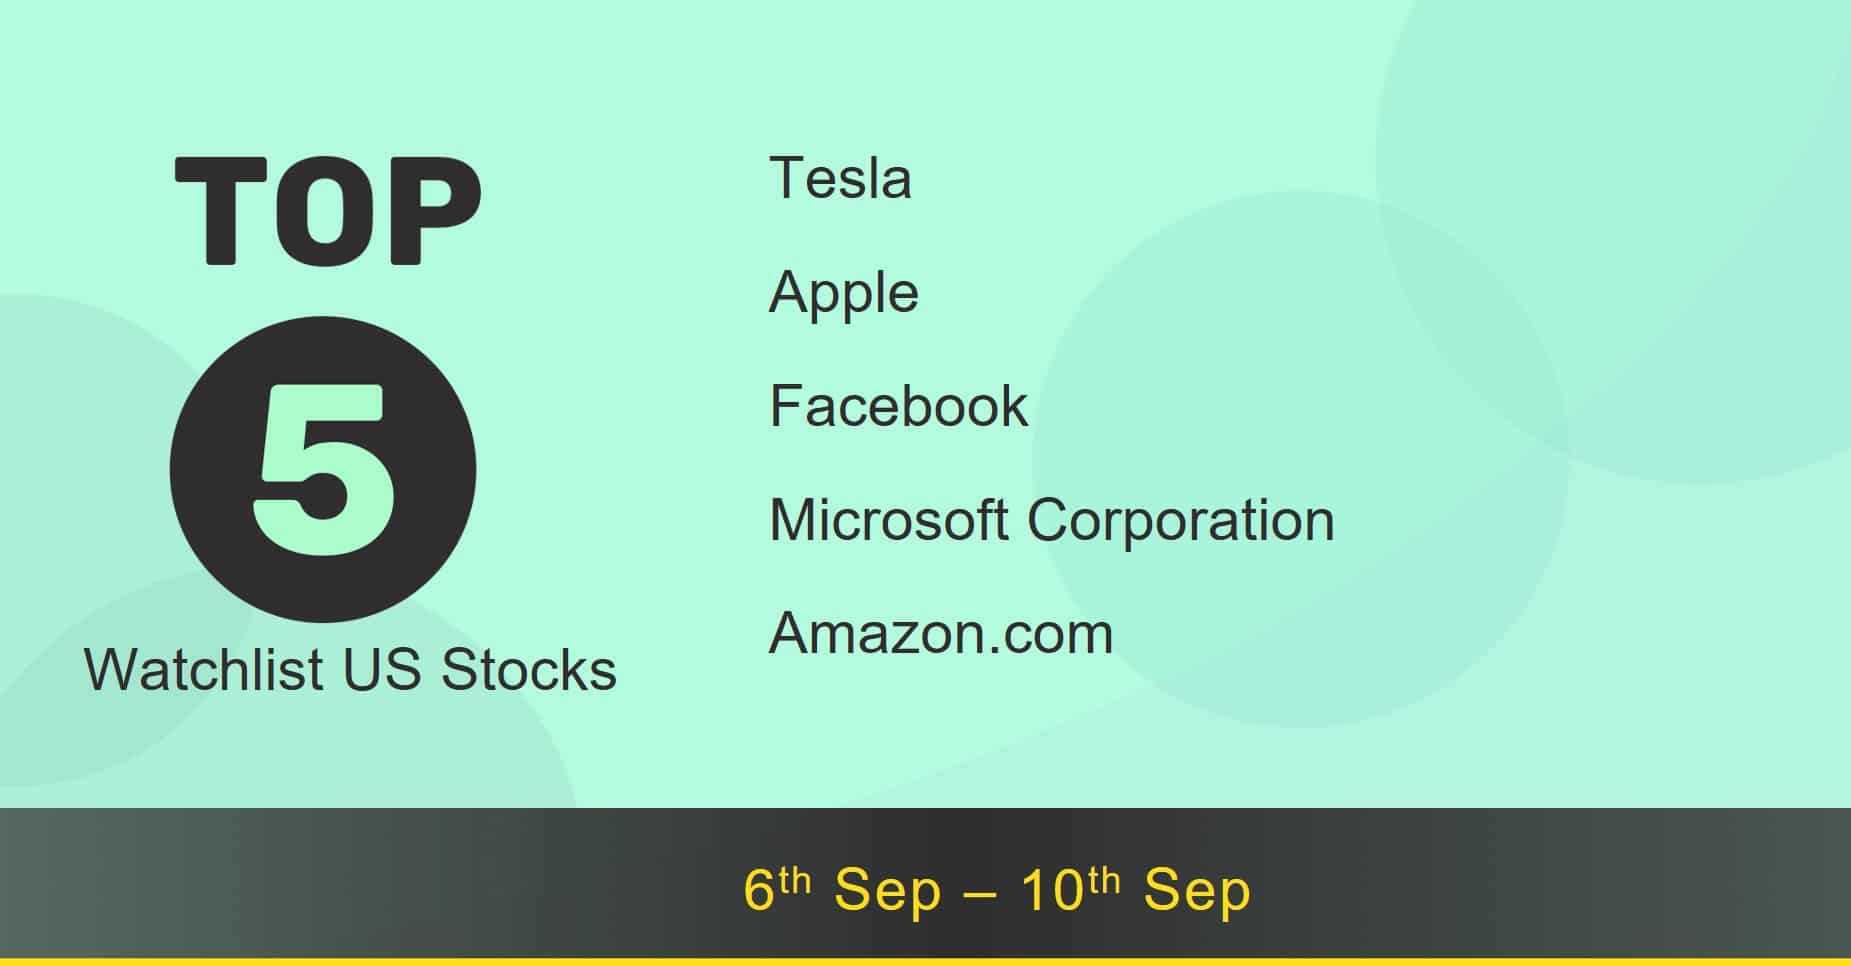 Top news and market movers ⚡ this week: 10th Sep’ 21